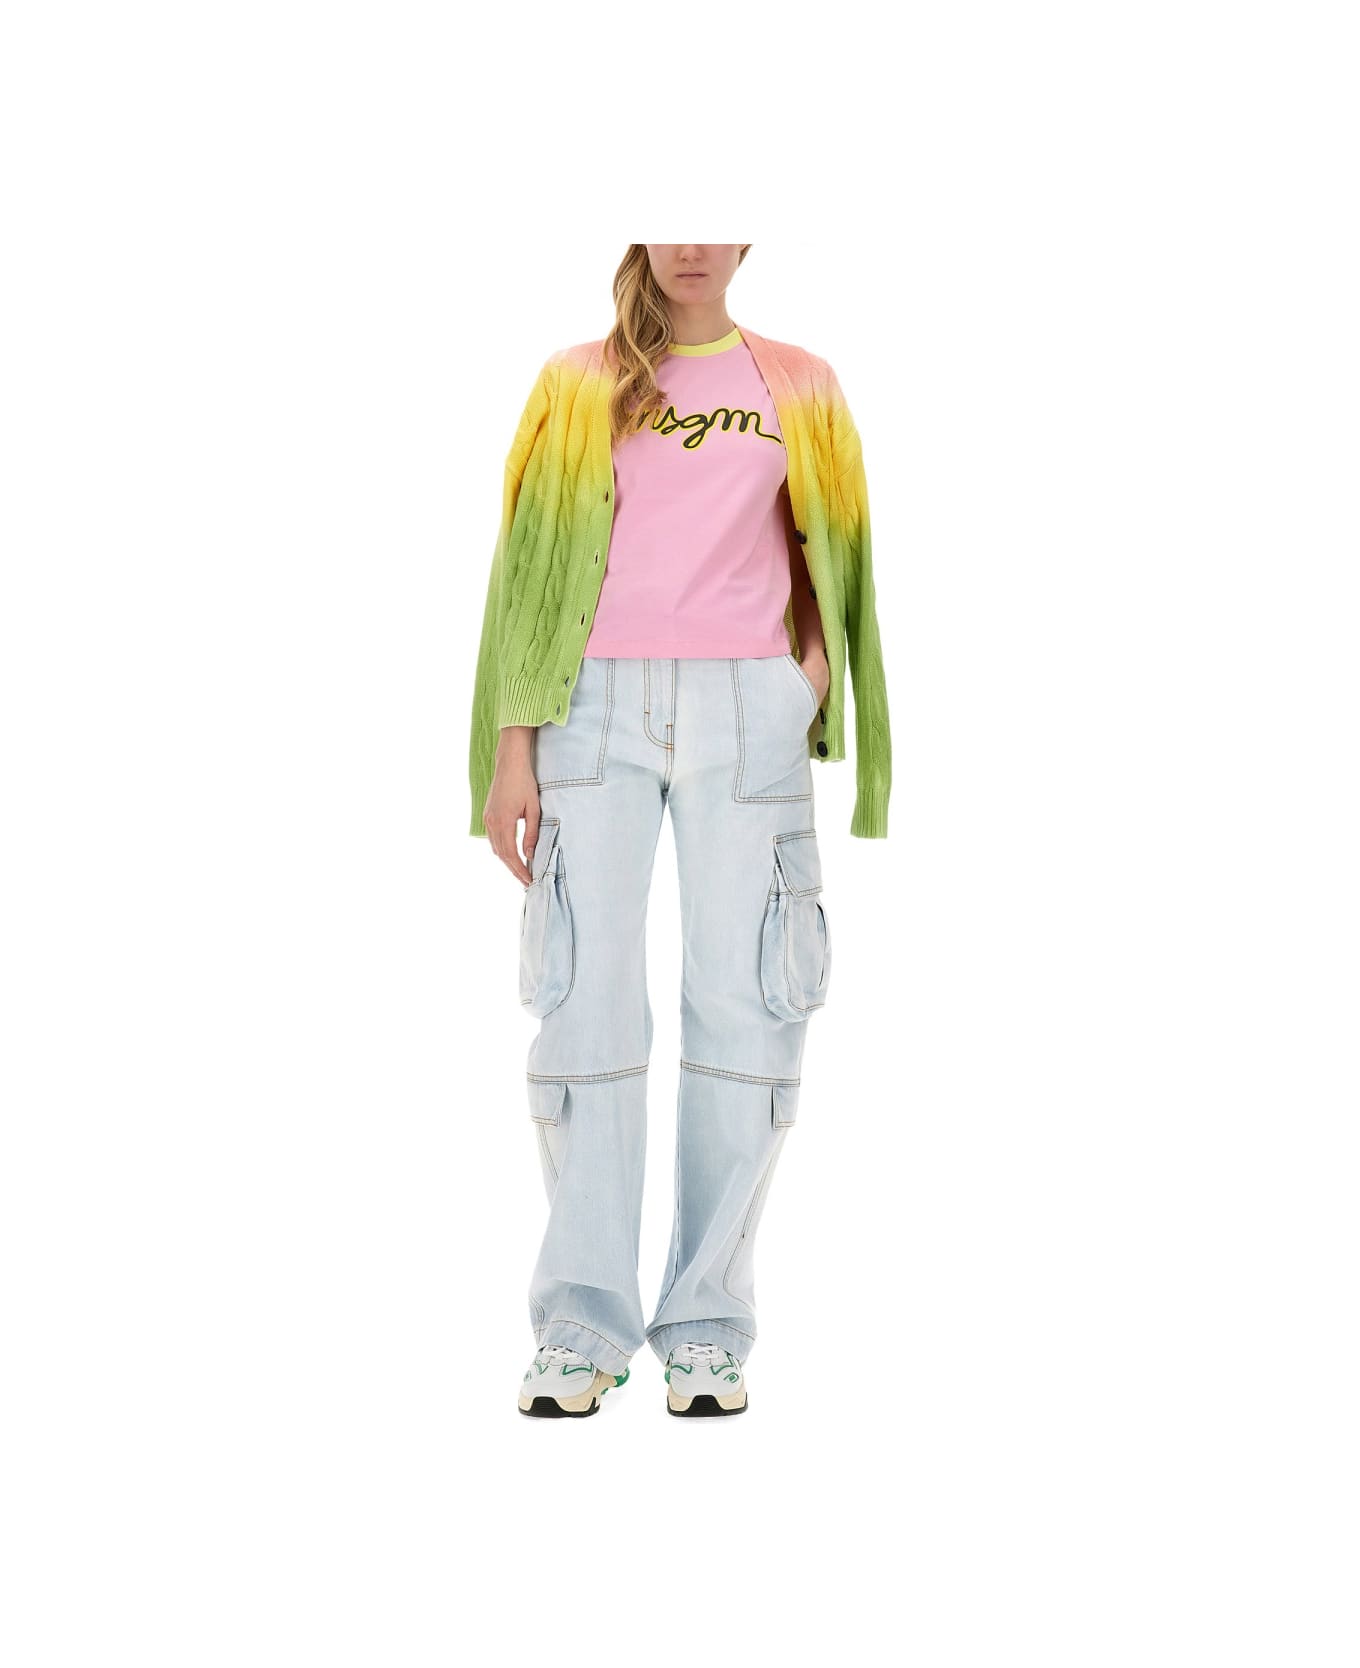 MSGM T-shirt With Logo - PINK